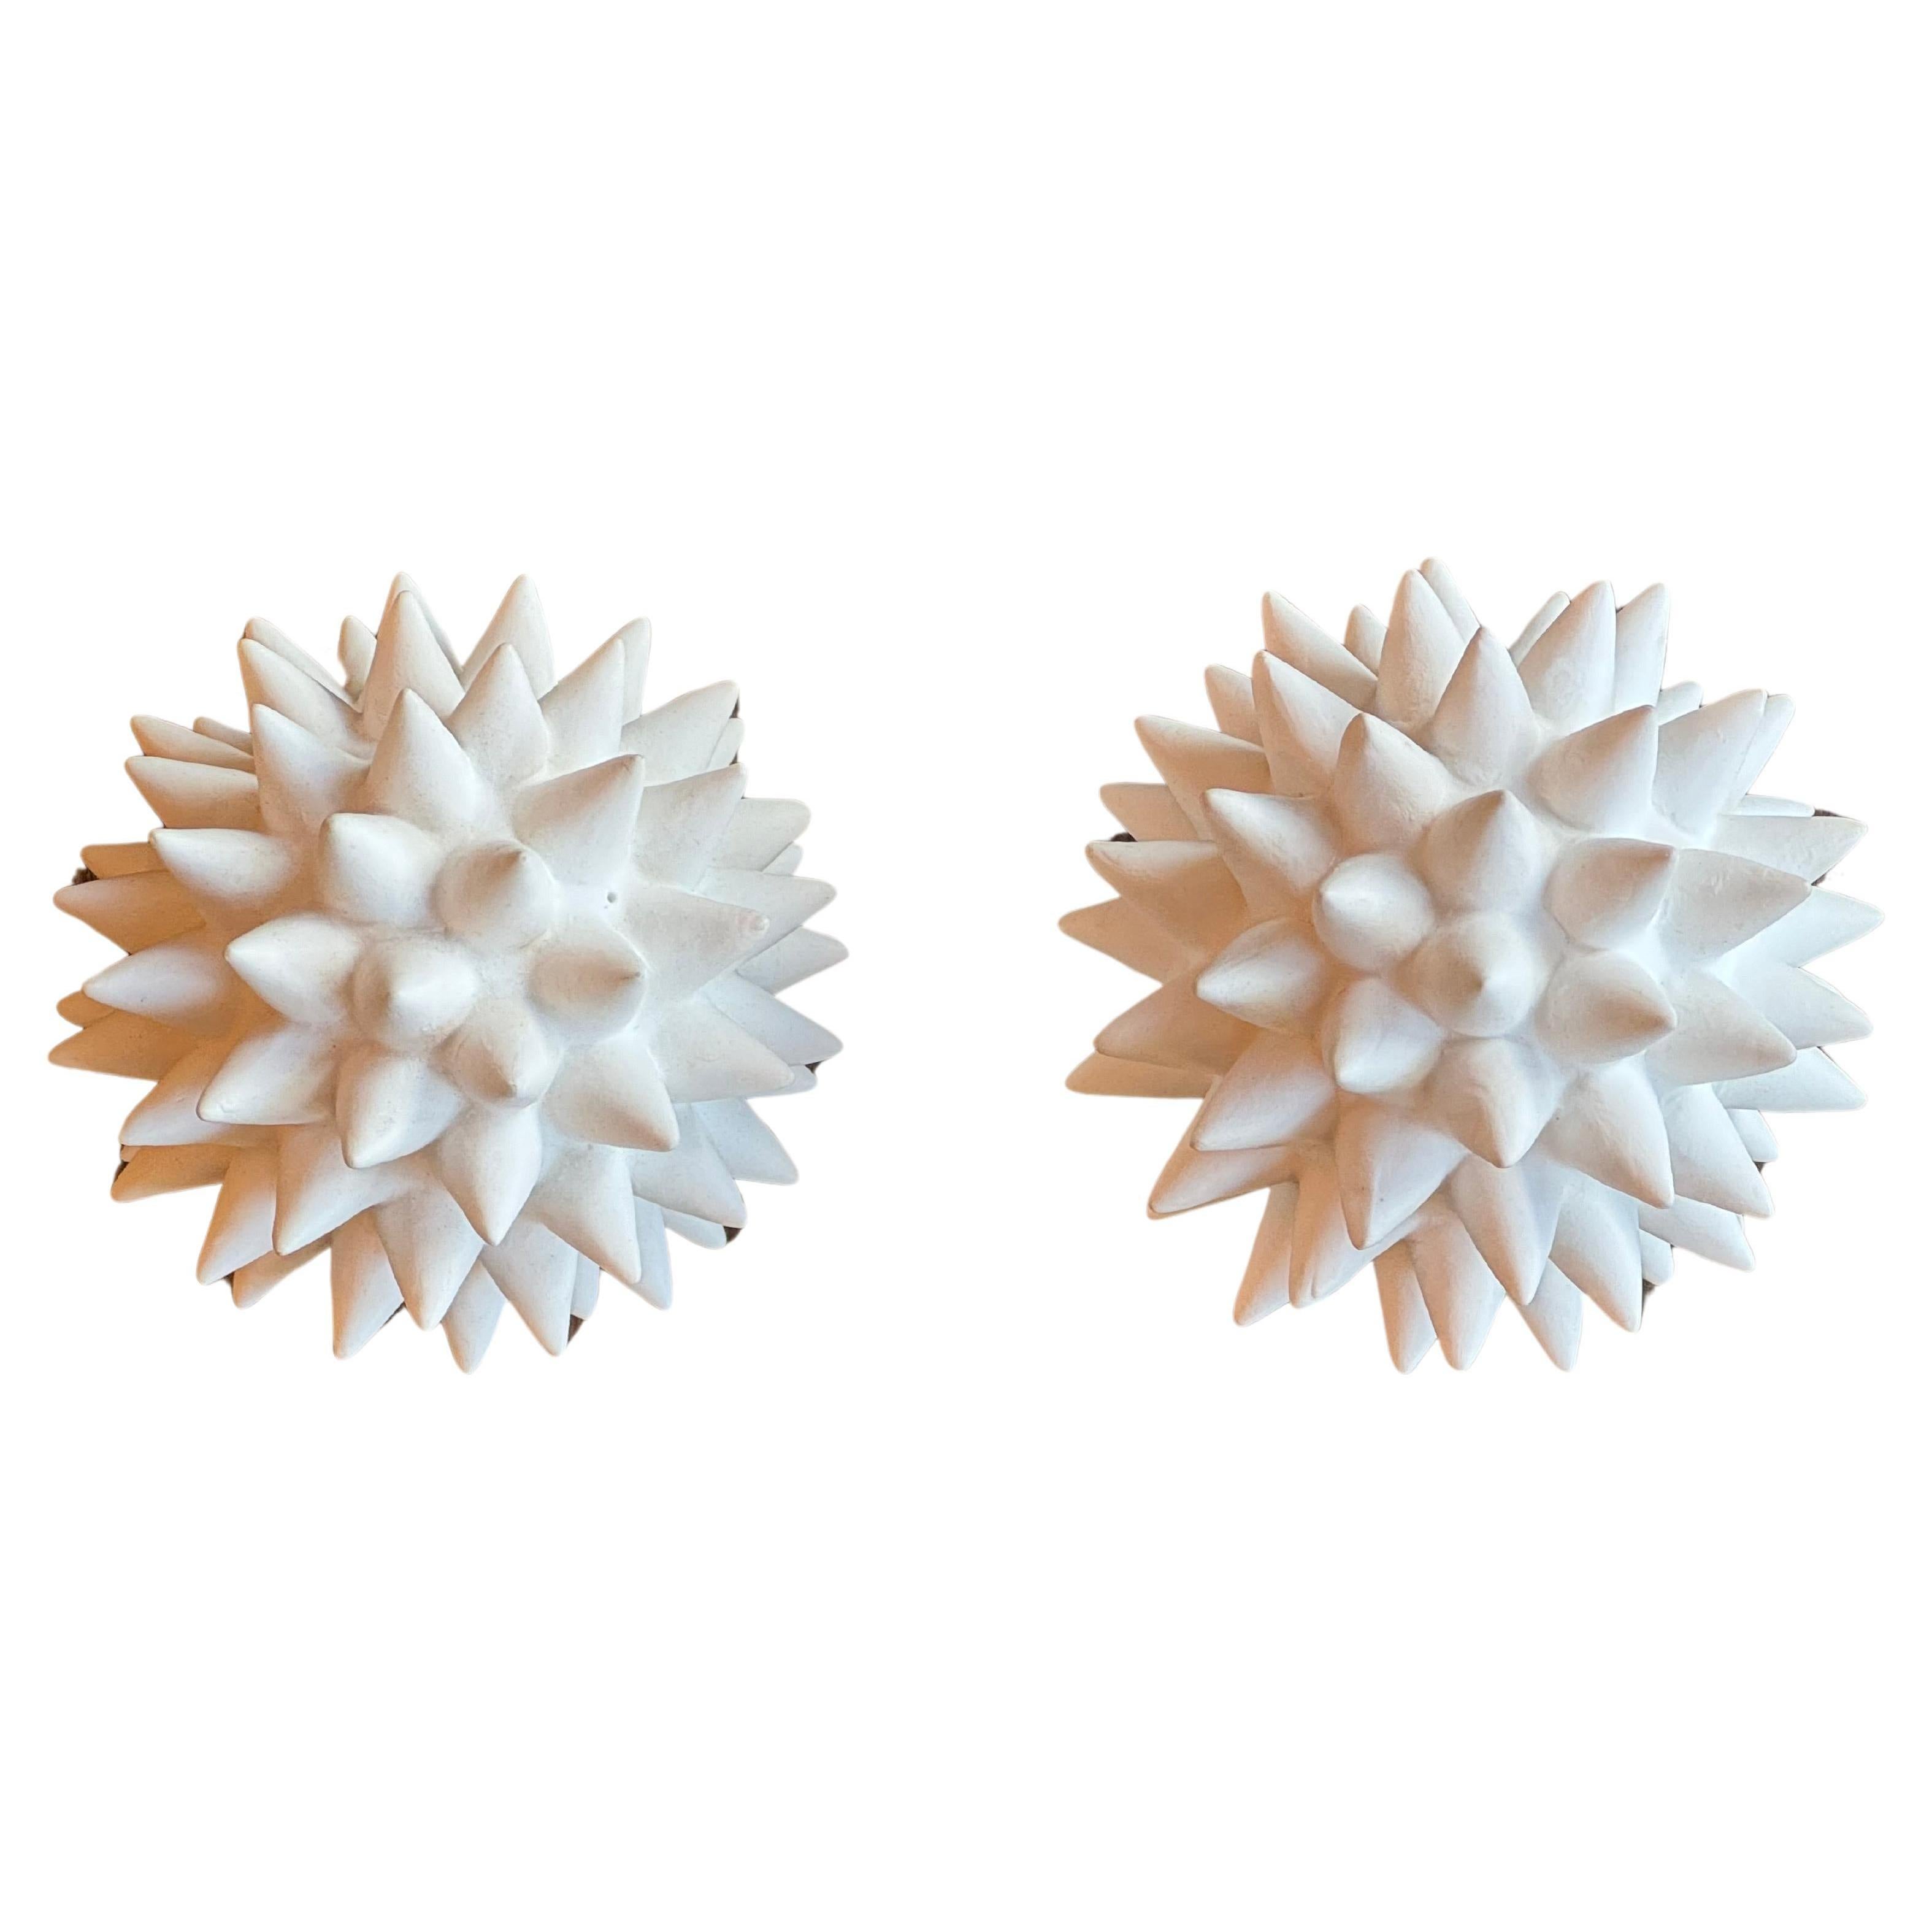 Ceramic Urchins sourced by Martyn Lawrence Bullard from Paris, France
Limited edition, one pair available
Solid ceramic, painted in a white matte finish



